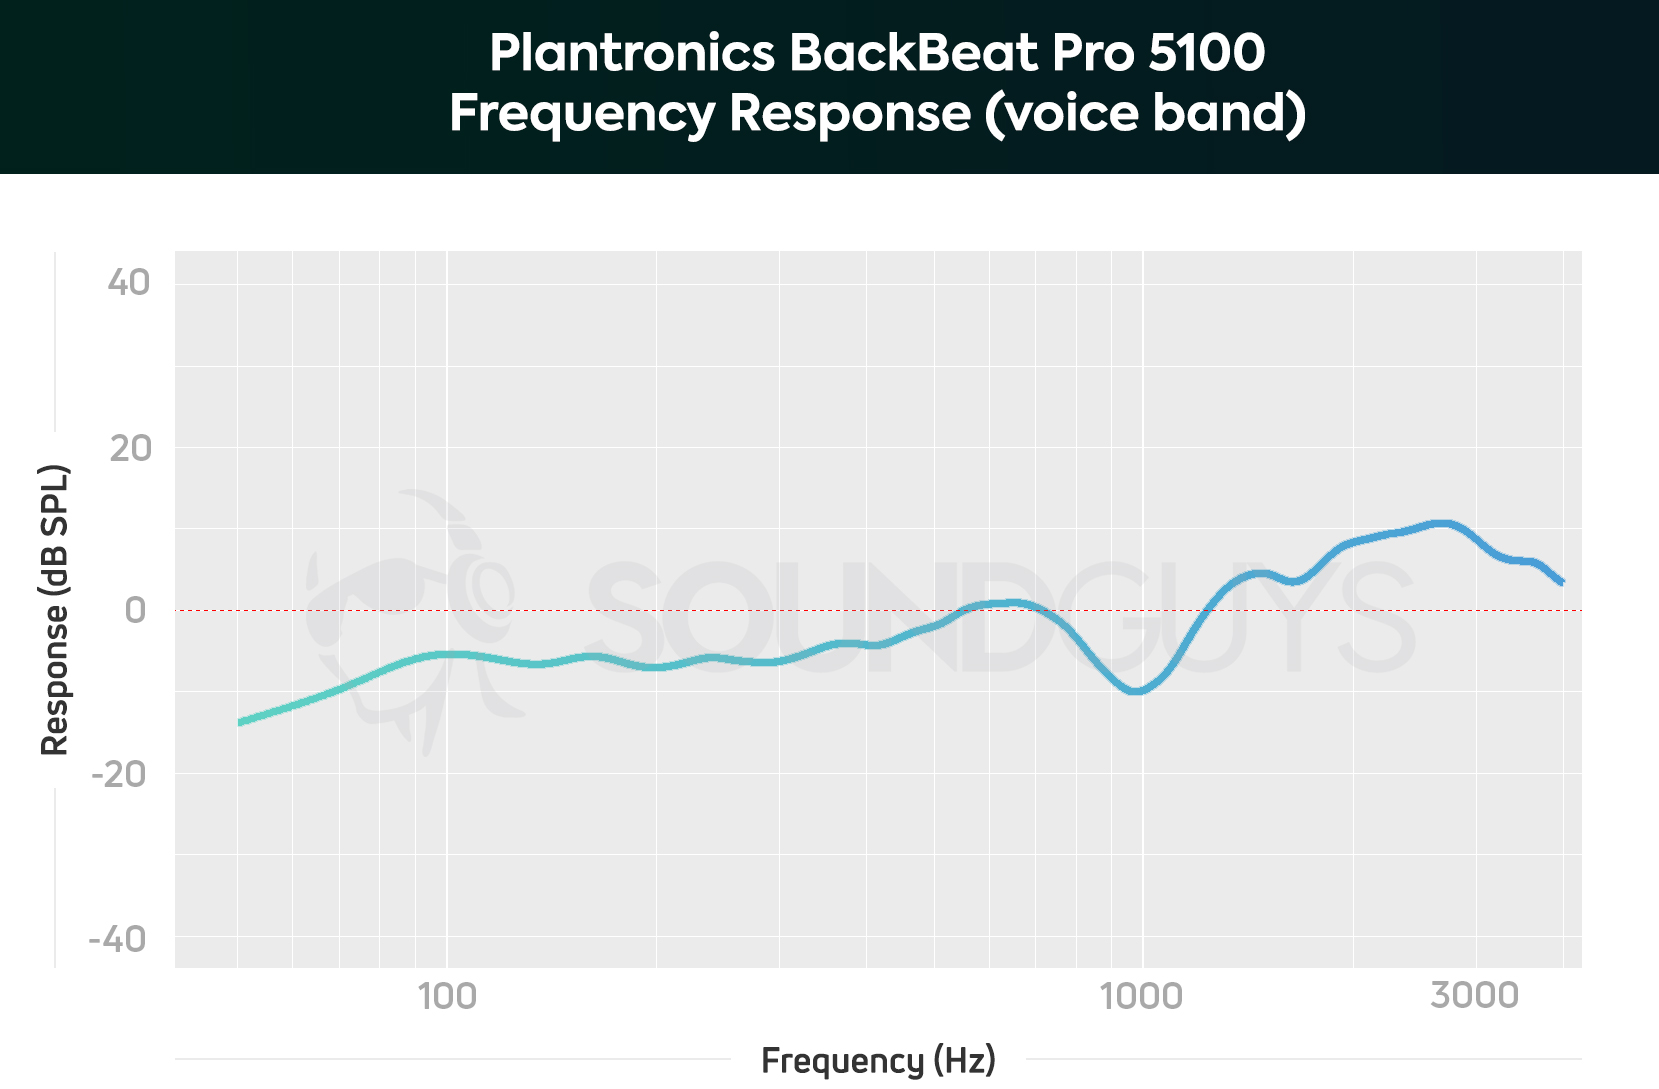 A chart depicting the Plantronics BackBeat Pro 5100 true wireless earbuds' microphone frequency response, limited to the human voice band.